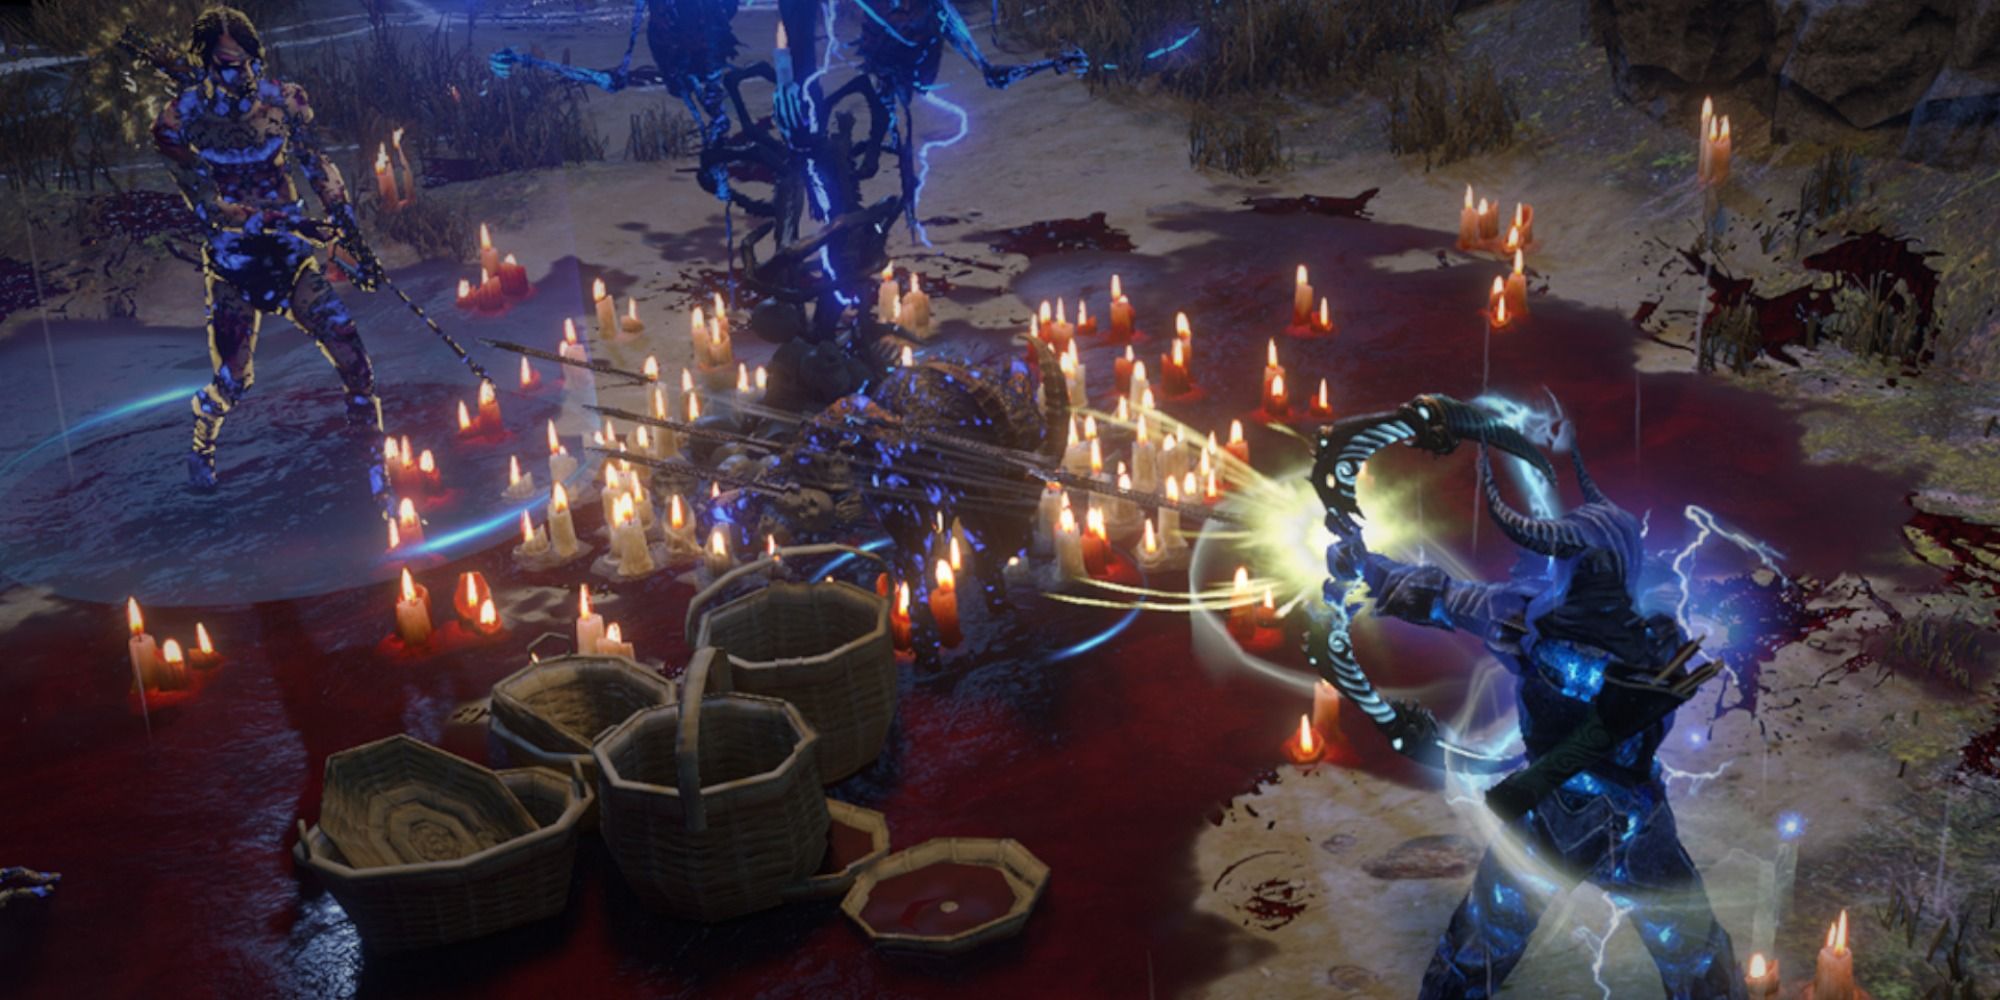 Path of Exile archer shooting two enemies blood and candles on ground ahead